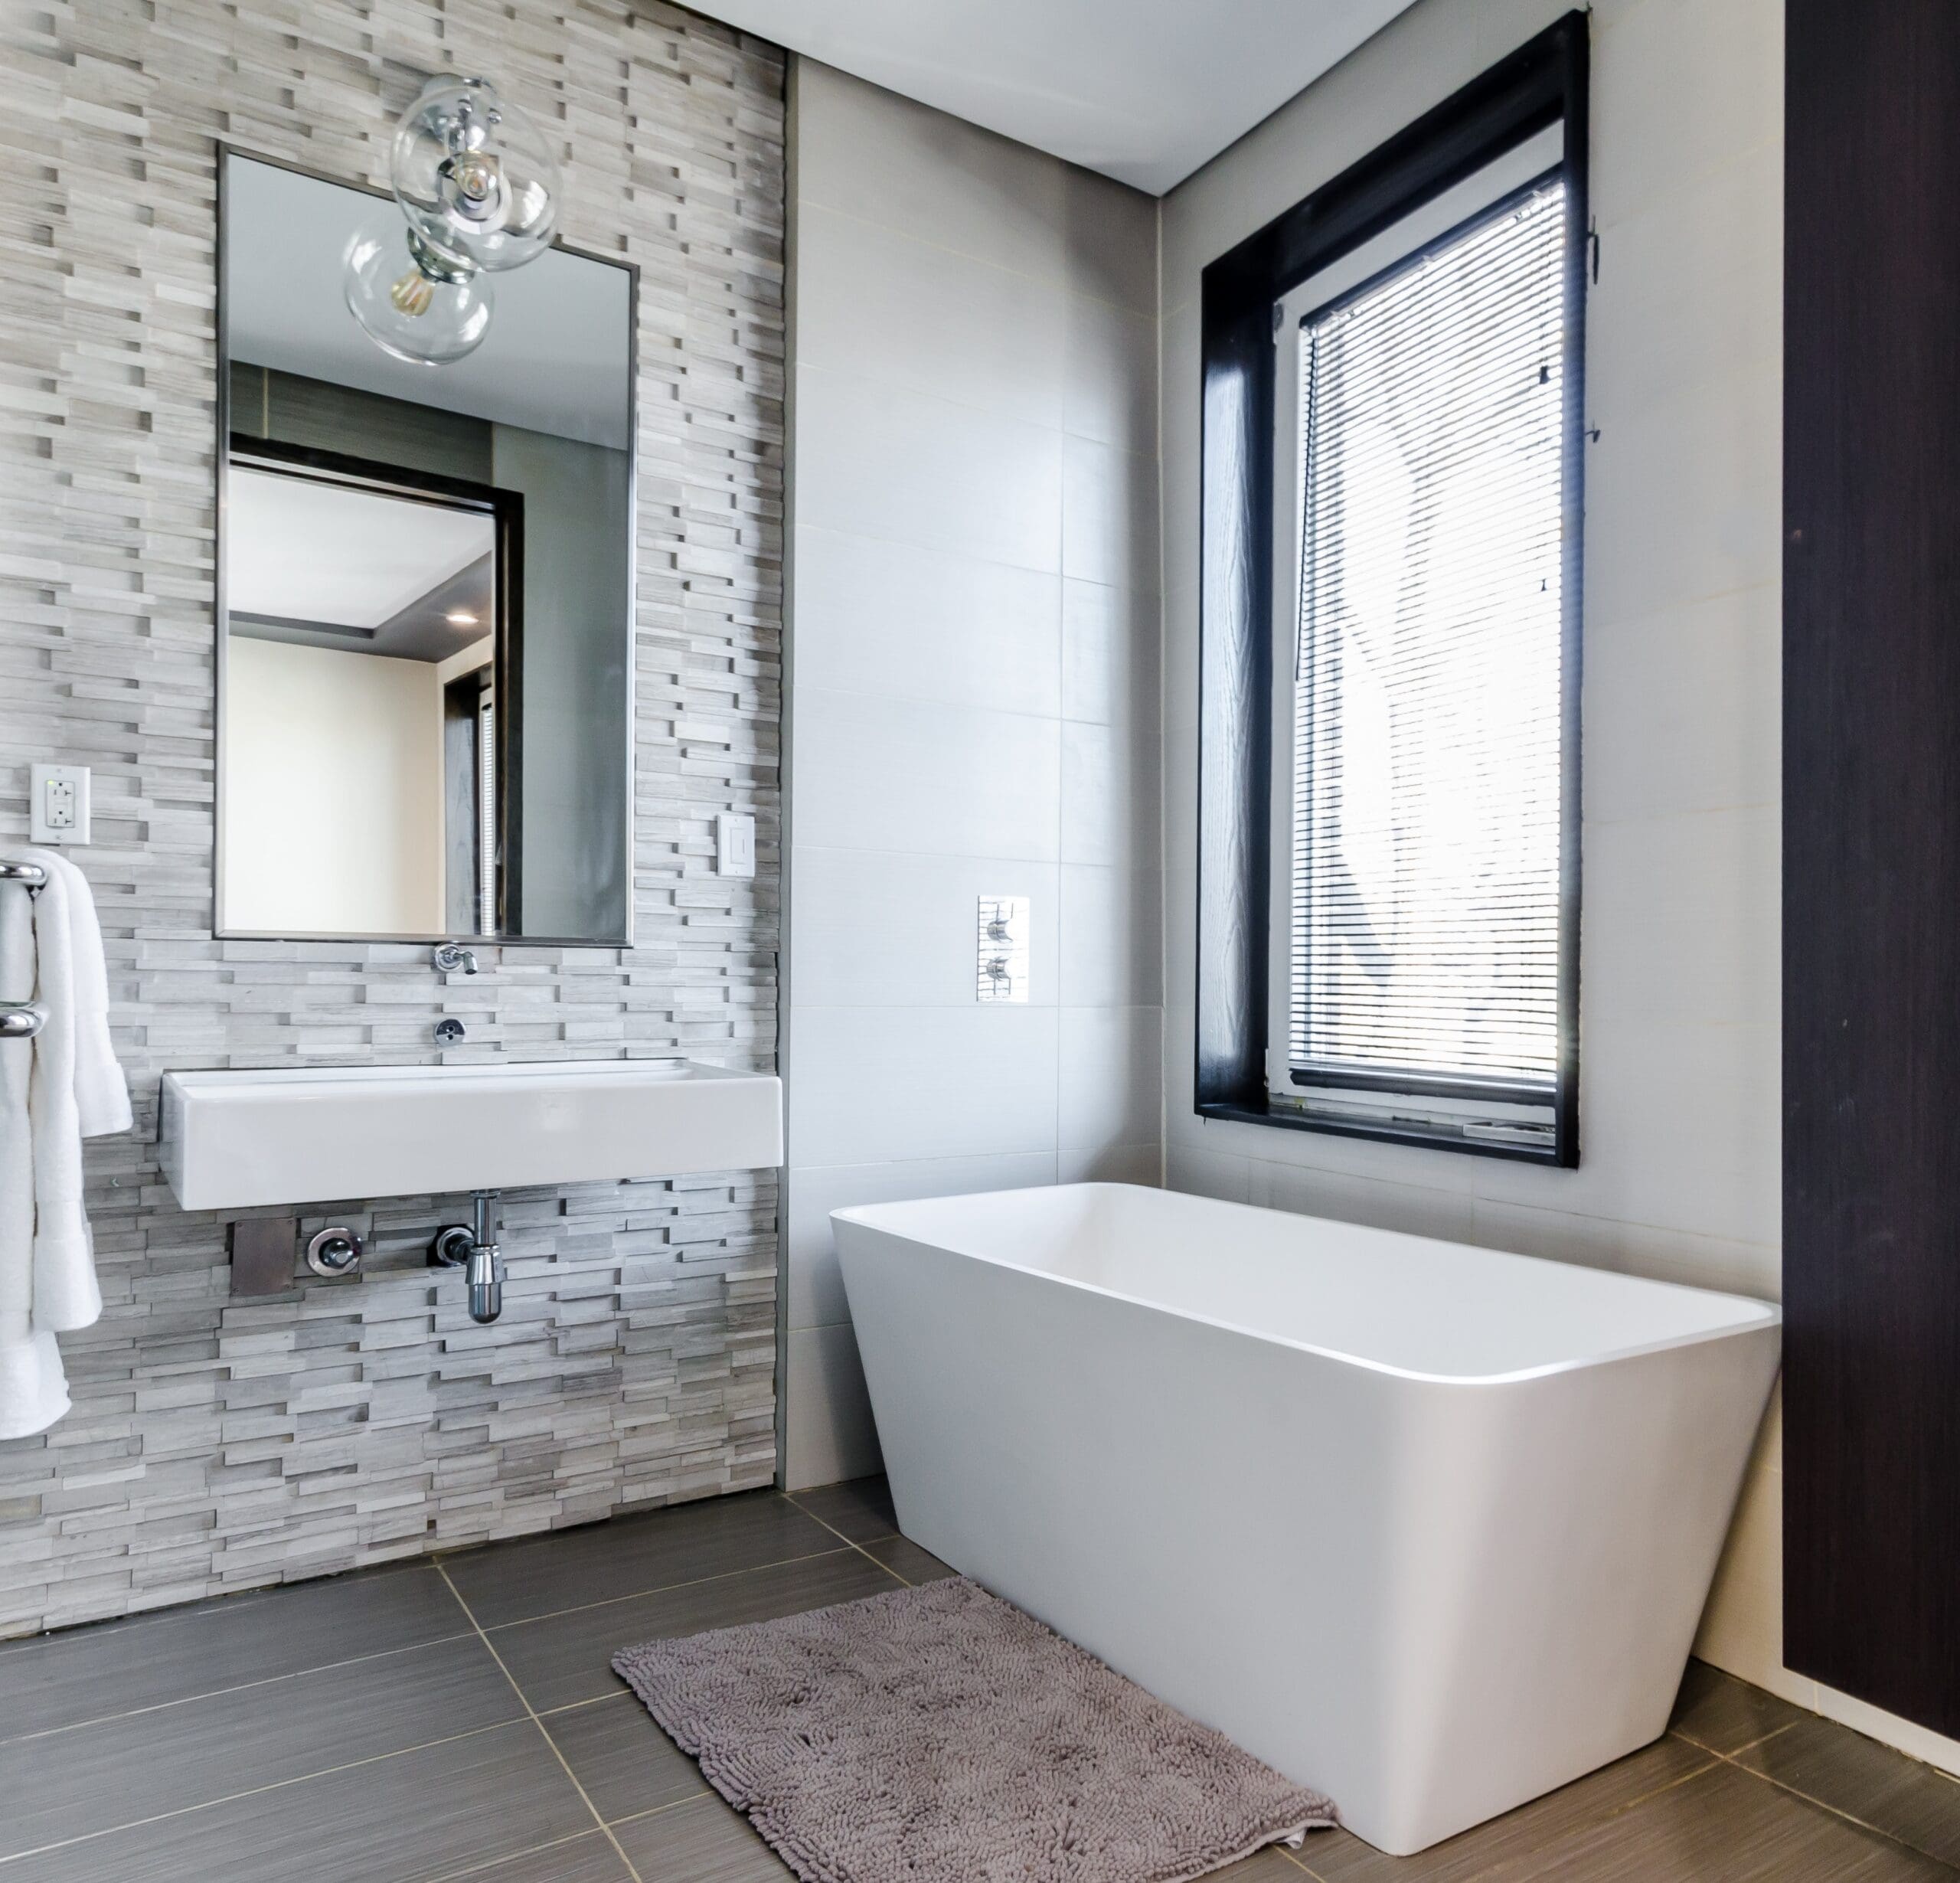 5 Remodeling Ideas for a Small Bathroom